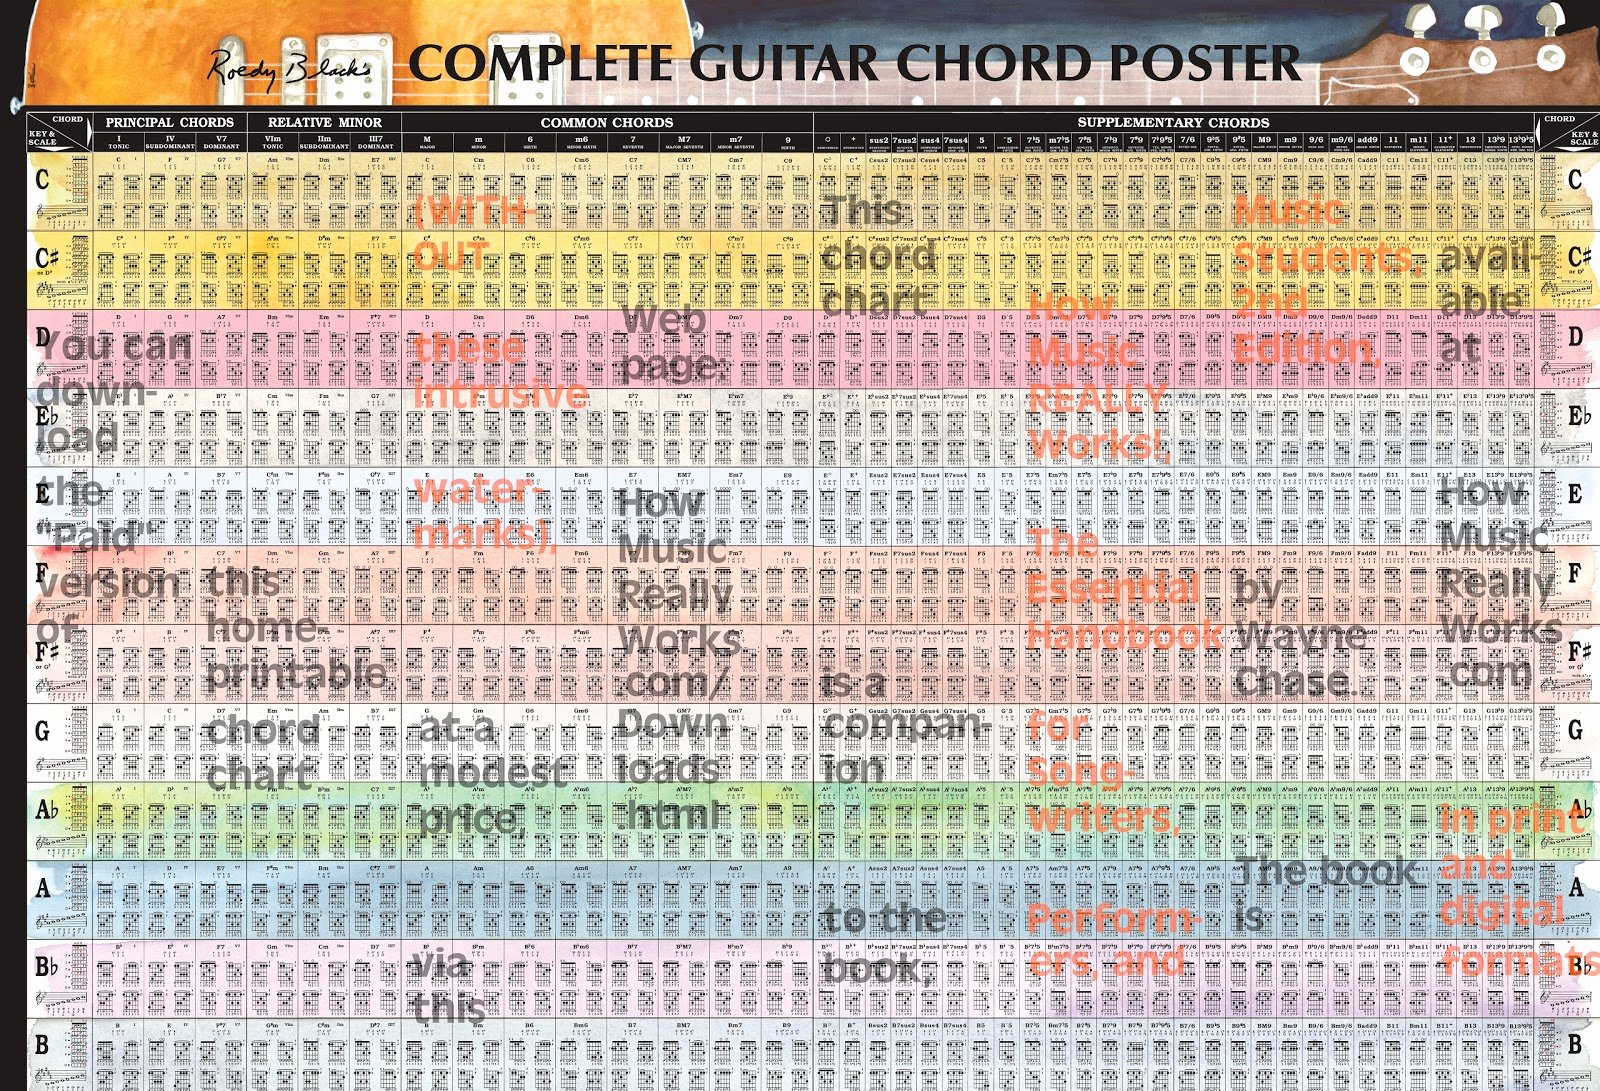 Complete Guitar Chords Chart Awesome Guitar Chord Chart Plete Guitar Chord Poster